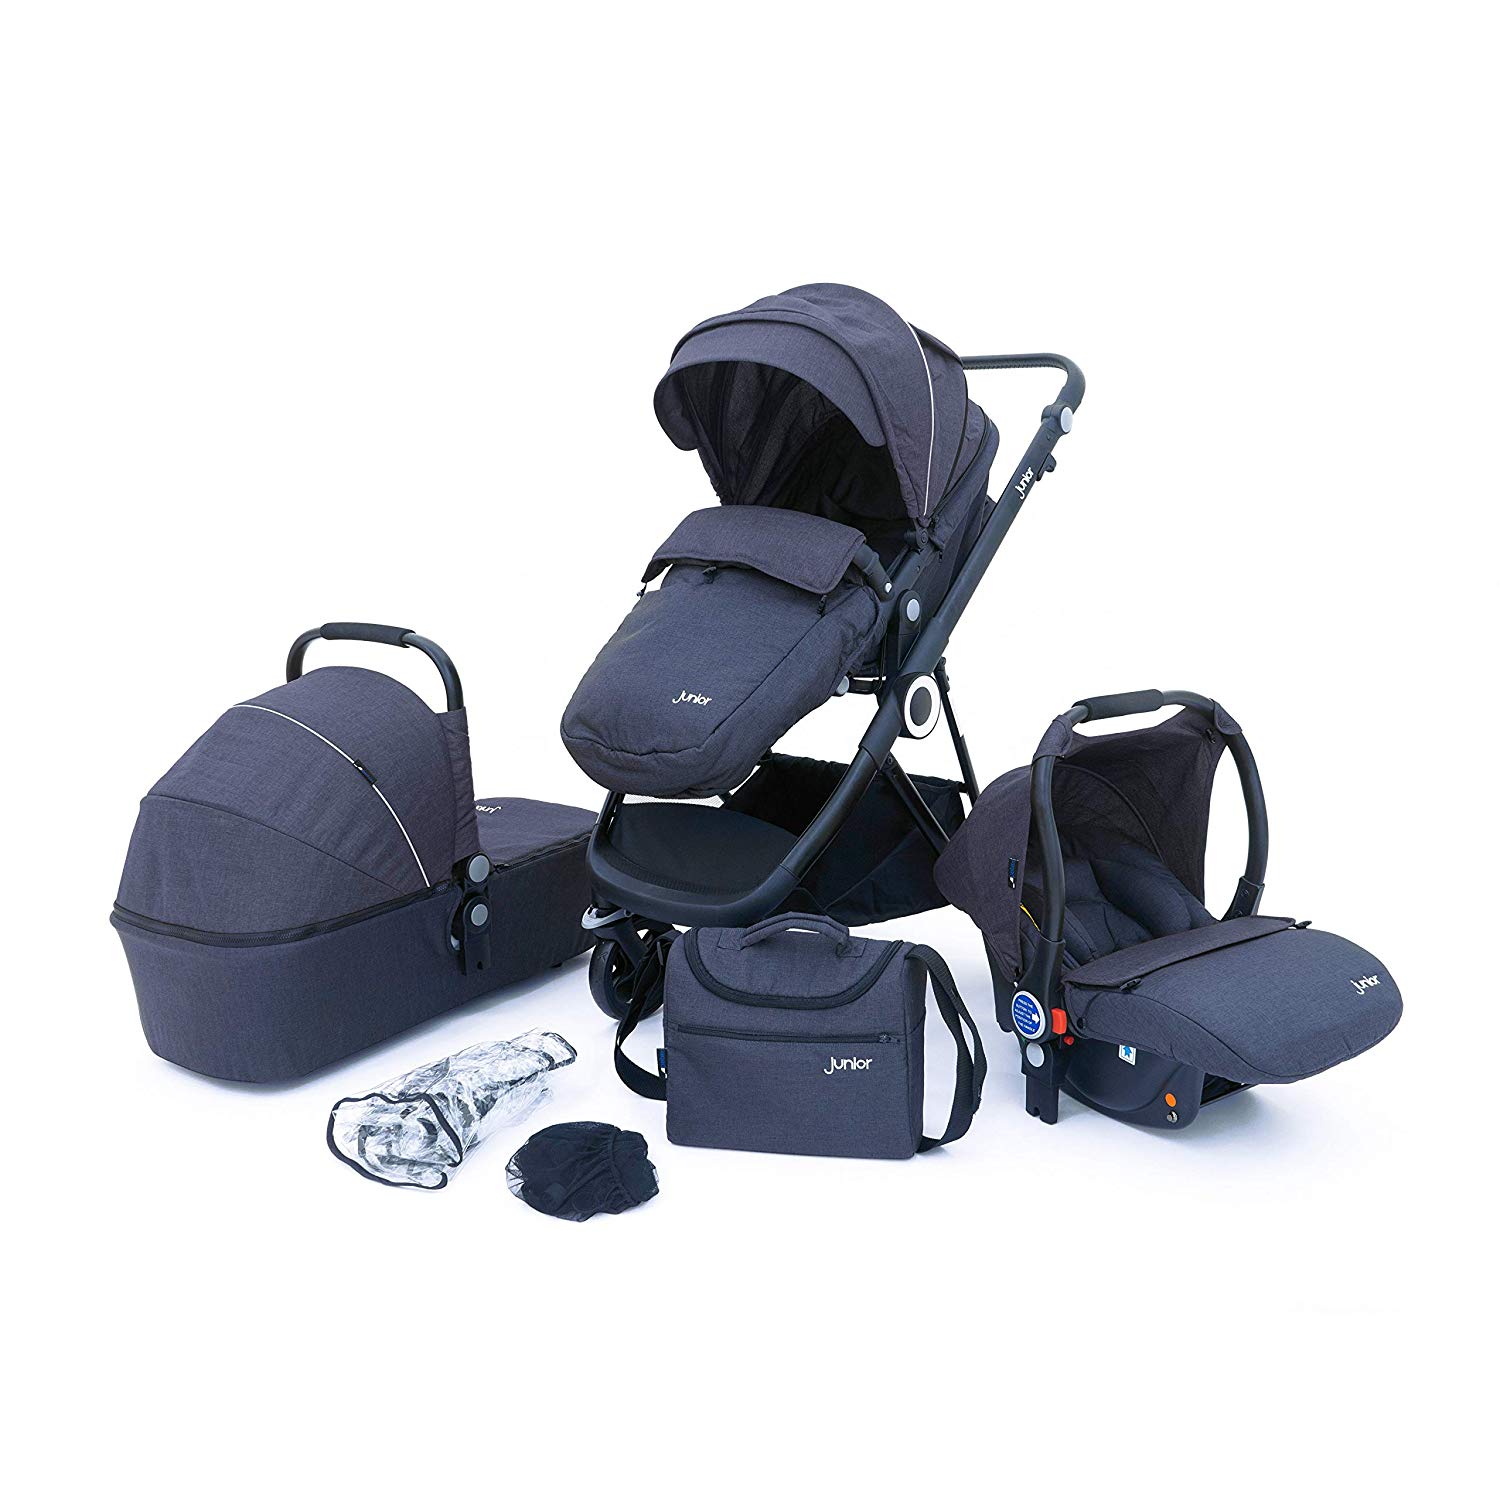 PETEX Multi-Traveller Combination Pushchair 3-in-1 Complete Set 10 Pieces with 3 Attachments and Extensive Accessories, Anthracite